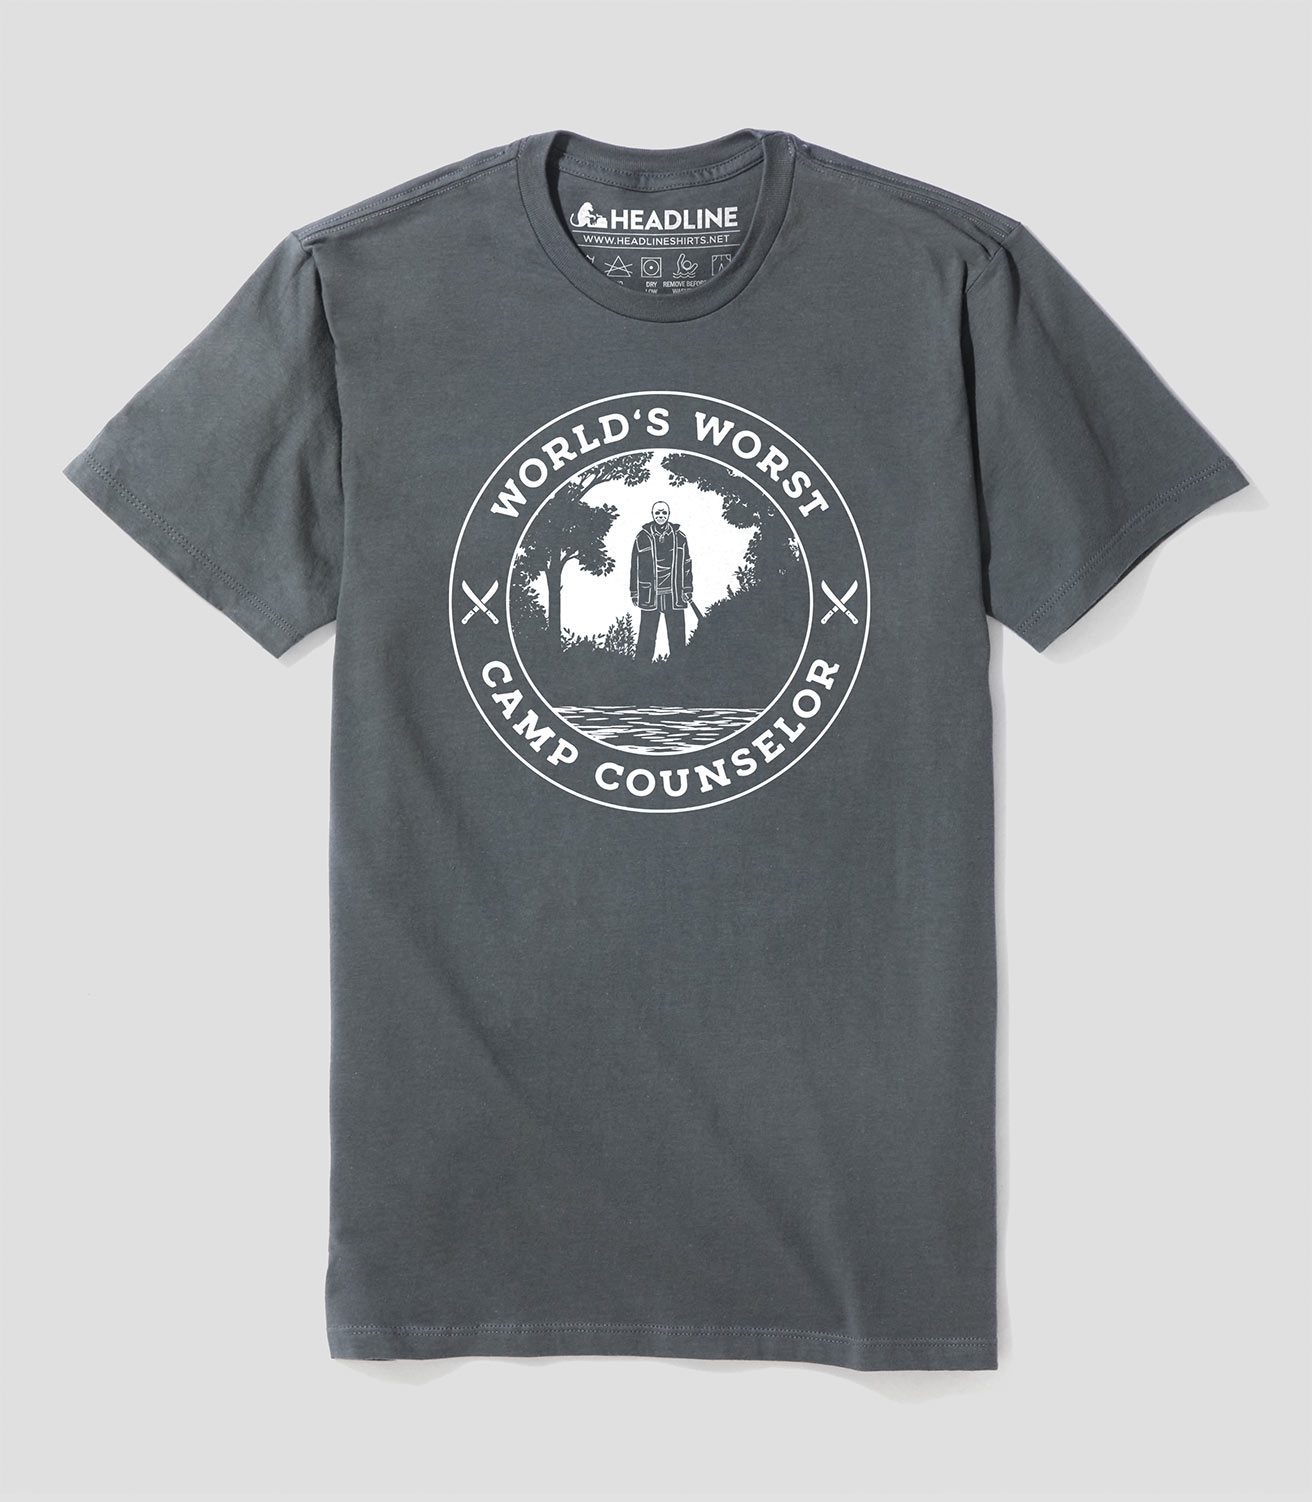 World's Worst Camp Counselor Unisex Cotton/Poly T-Shirt